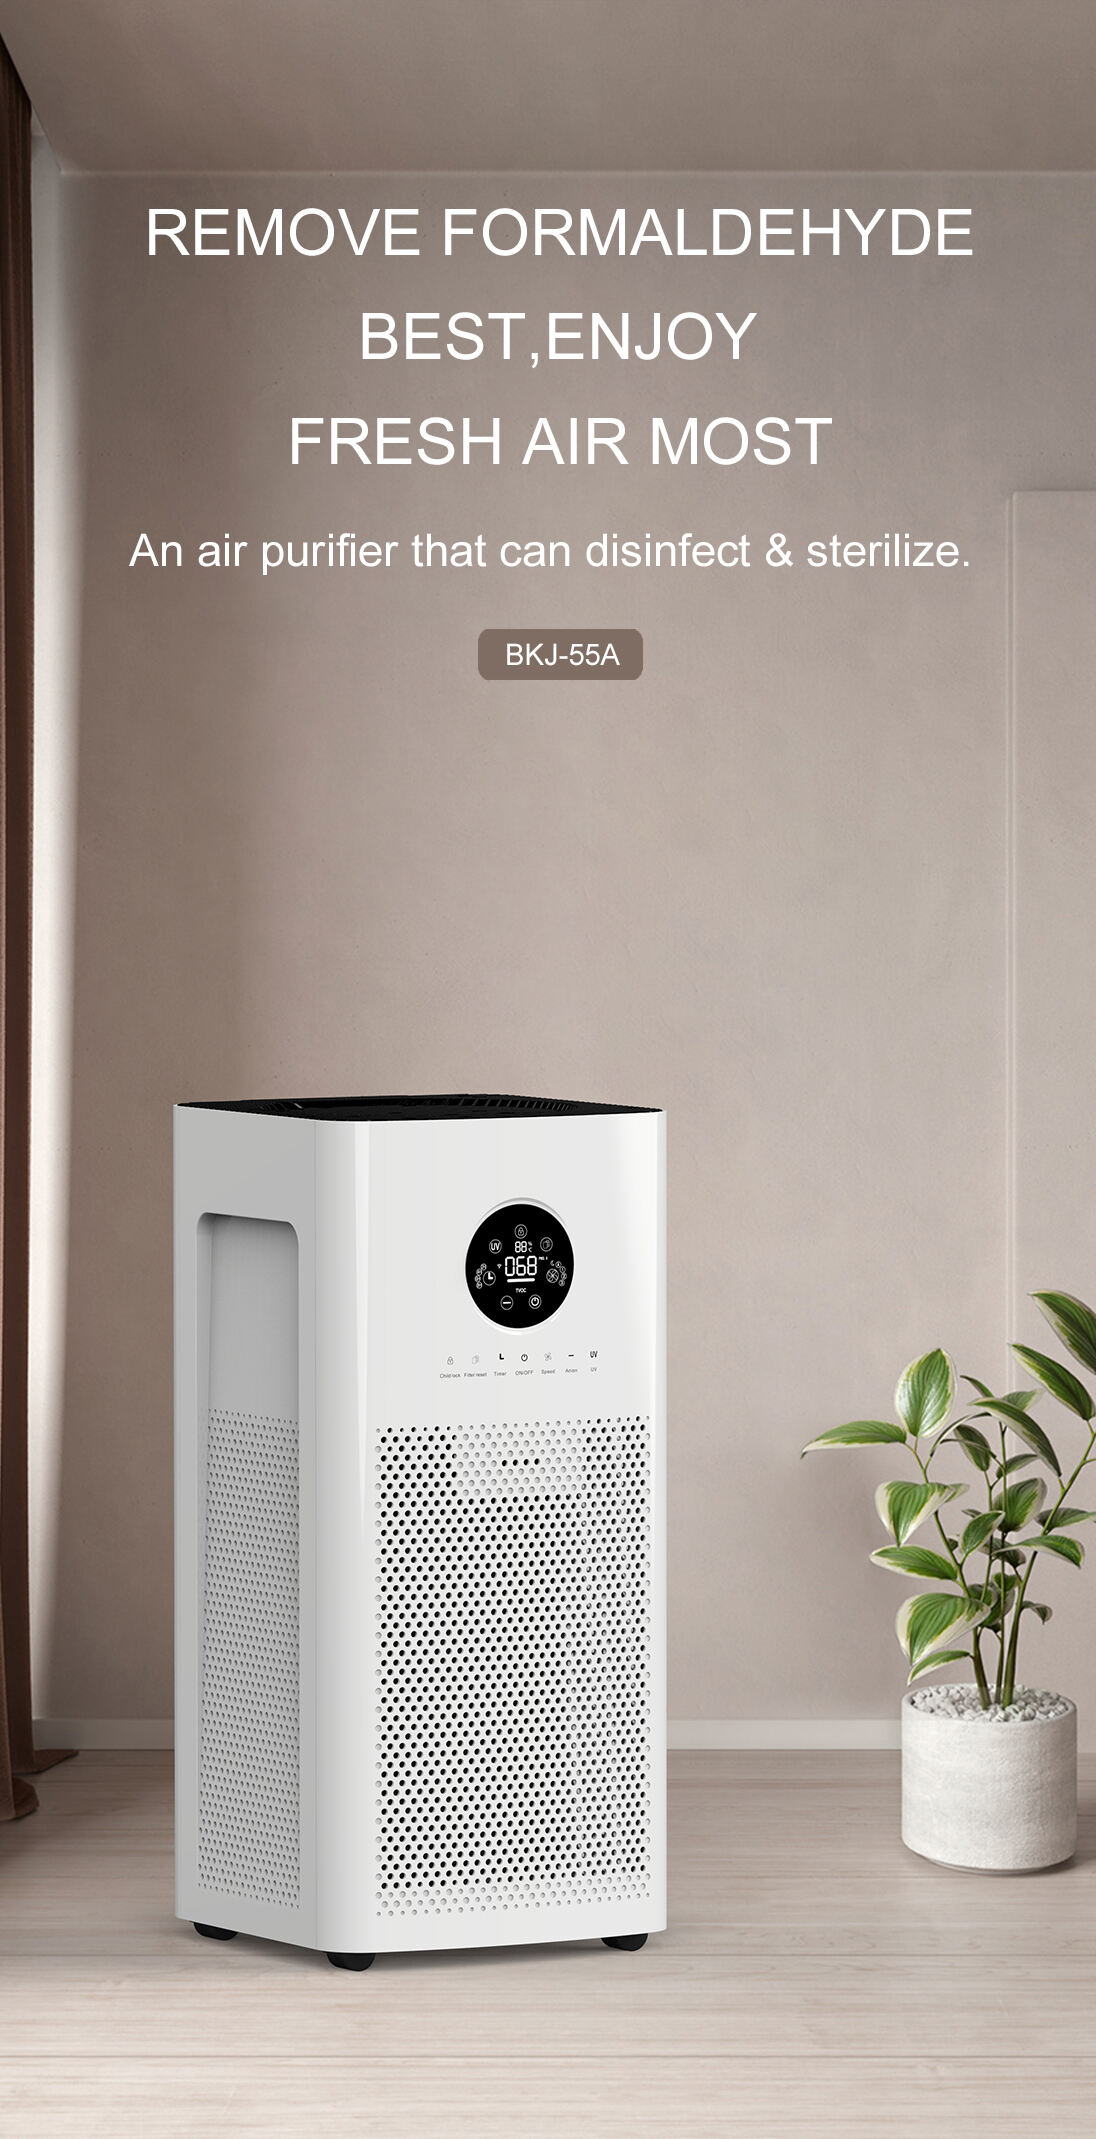 Oem Odm wholesale Mobile Household air purifier with anion uv Wifi details